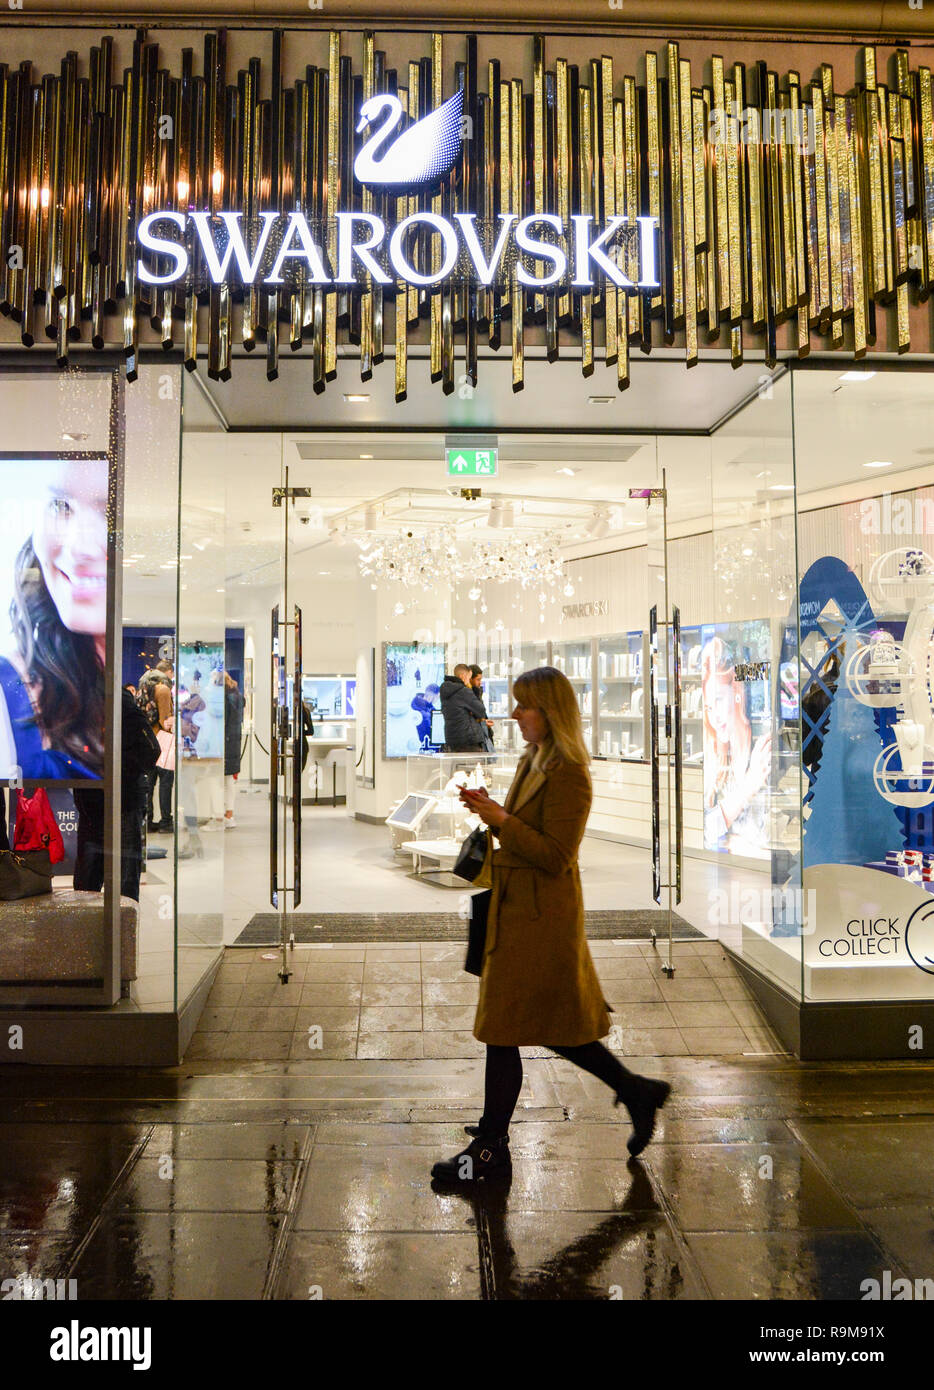 Page 3 - Swarovski Store High Resolution Stock Photography and Images -  Alamy